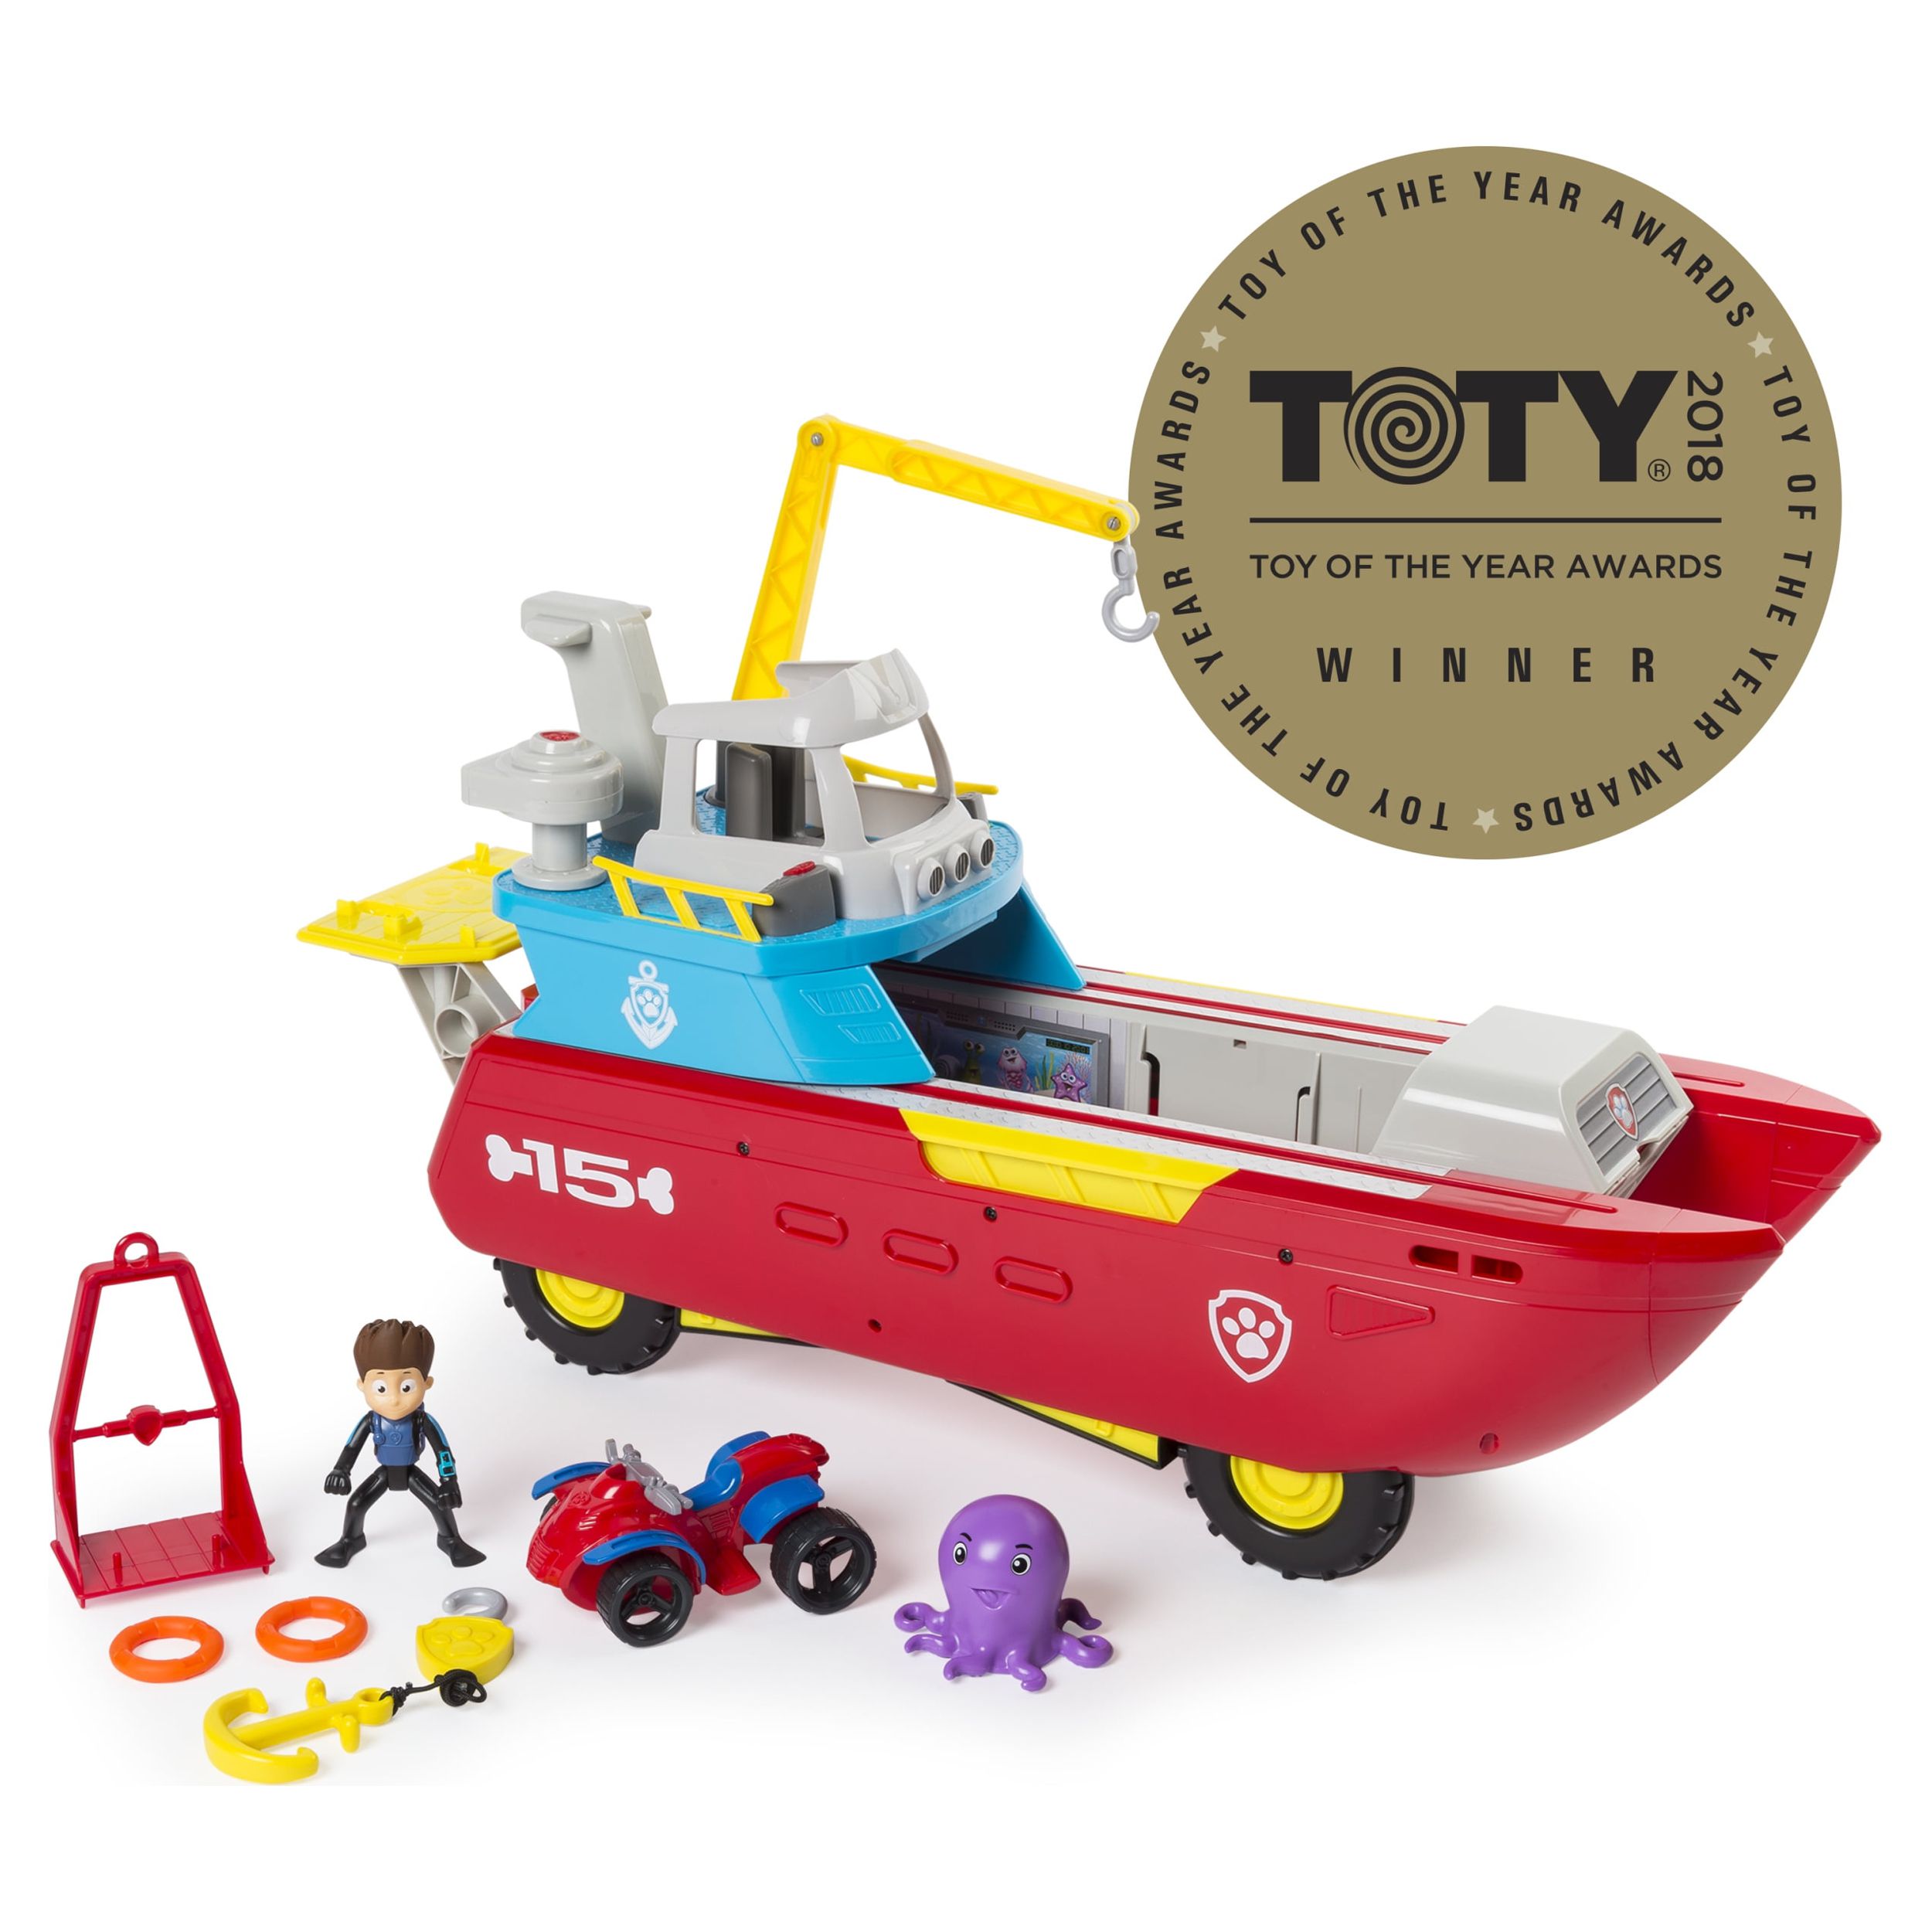 Paw Patrol Sea Patrol - Sea Patroller Transforming Vehicle with Lights and Sounds - image 1 of 14